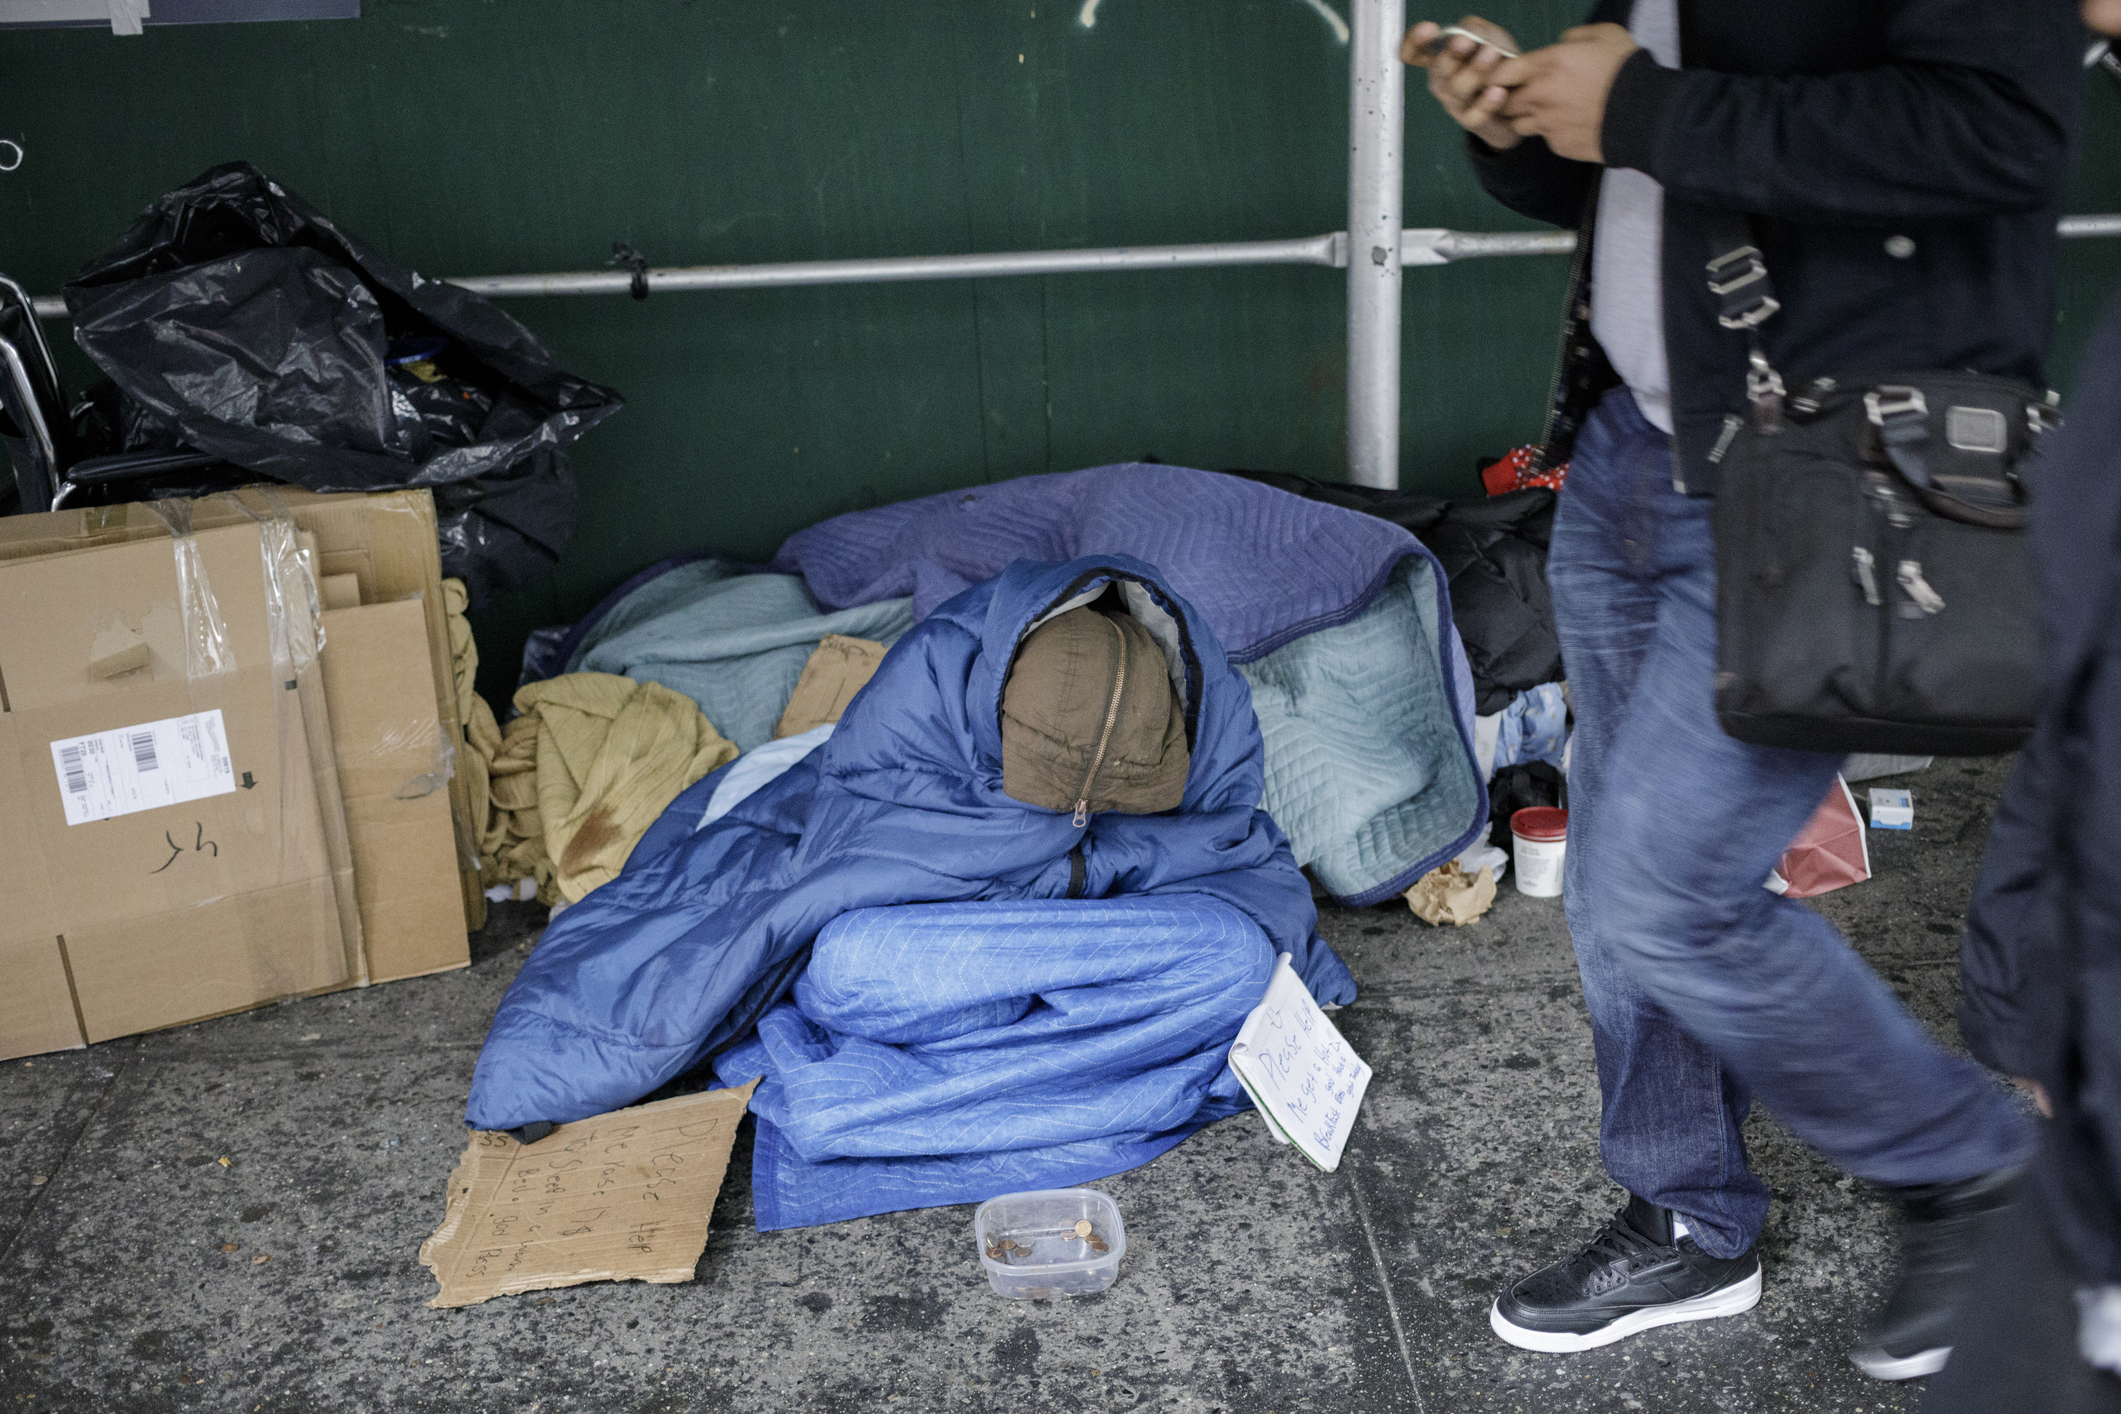 A homeless person sits wrapped with a blue moving blanket, while someone on their phone walks by.